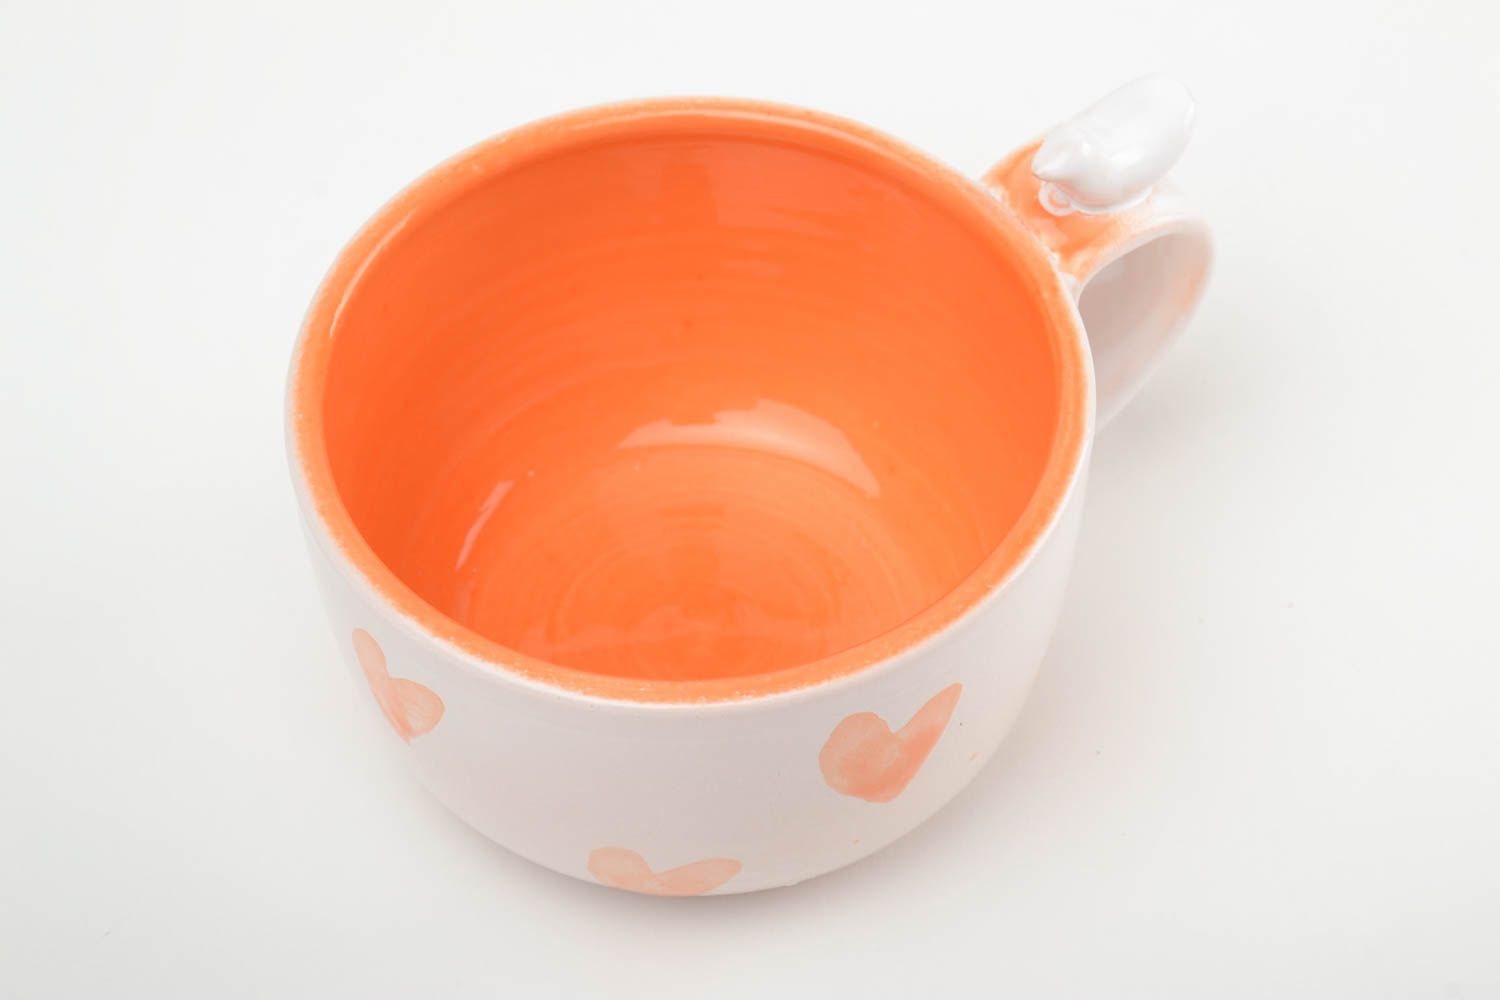 8 oz orange and white glazed ceramic teacup with a bird on handle and heart pattern photo 2